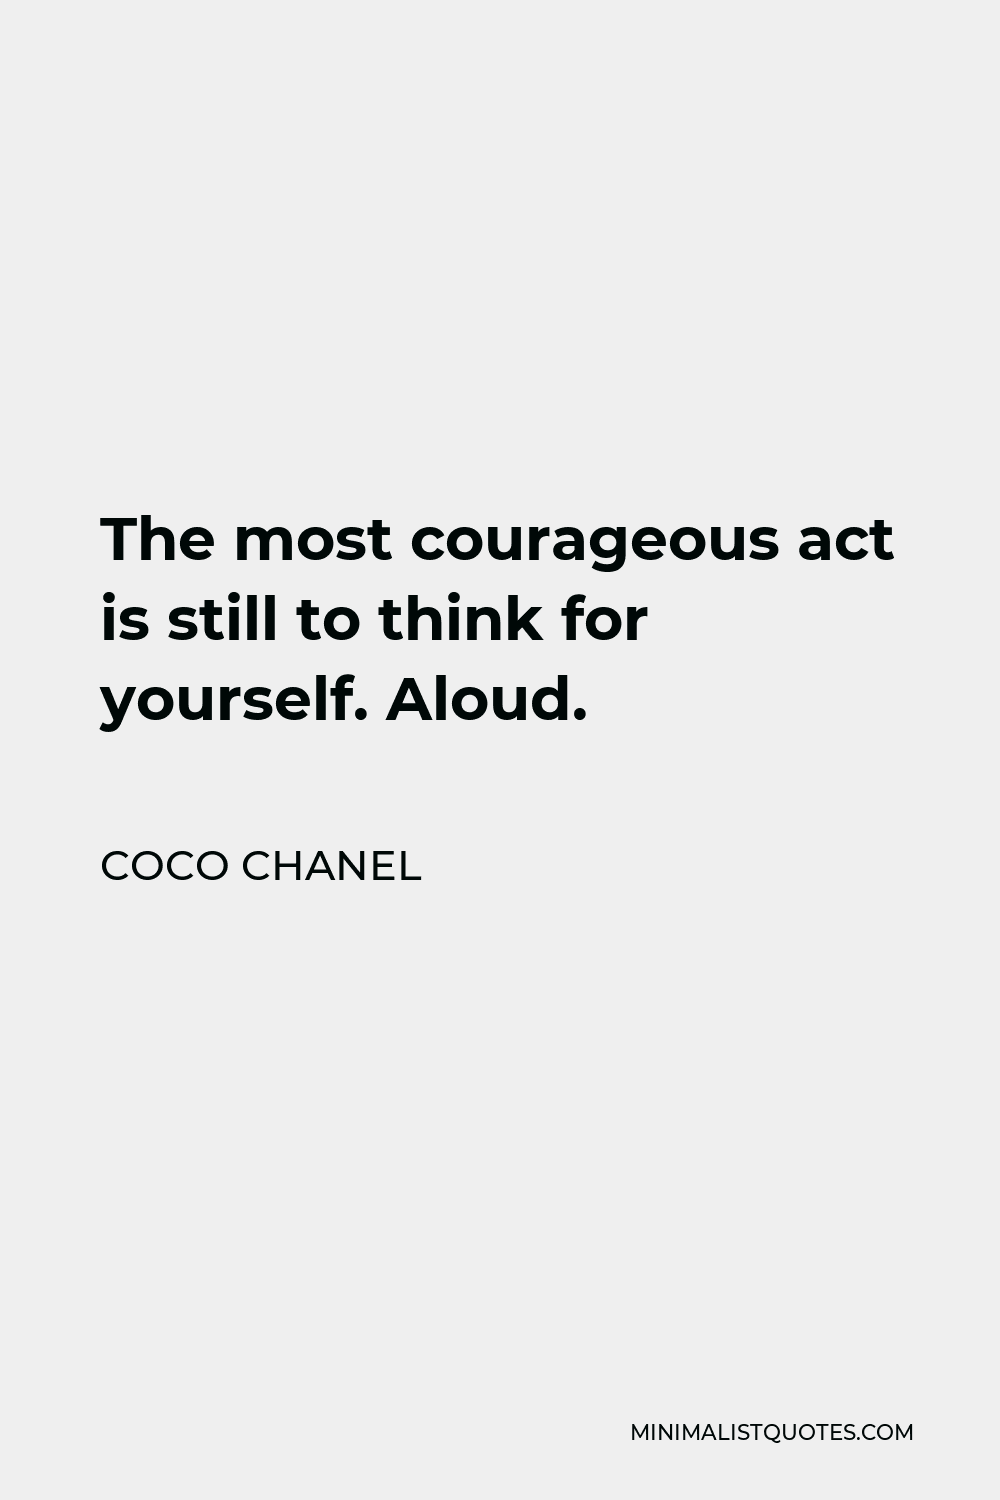 Coco Chanel Quote - The most courageous act is still to think for yourself. Aloud.